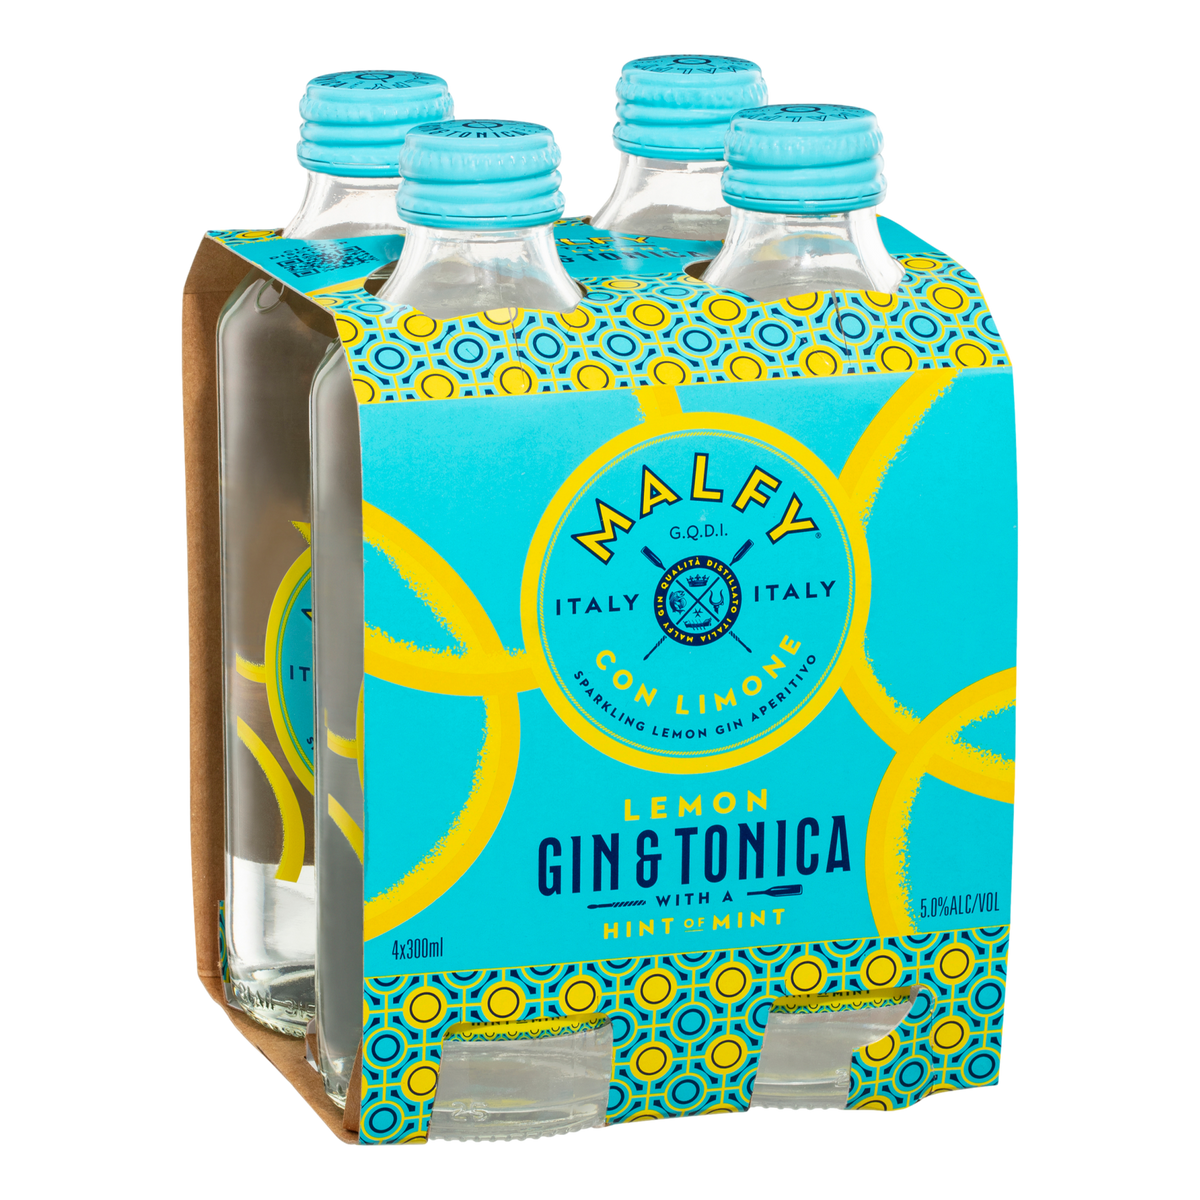 Malfy Con Limone Gin & Tonica 300ml Bottle 4 Pack